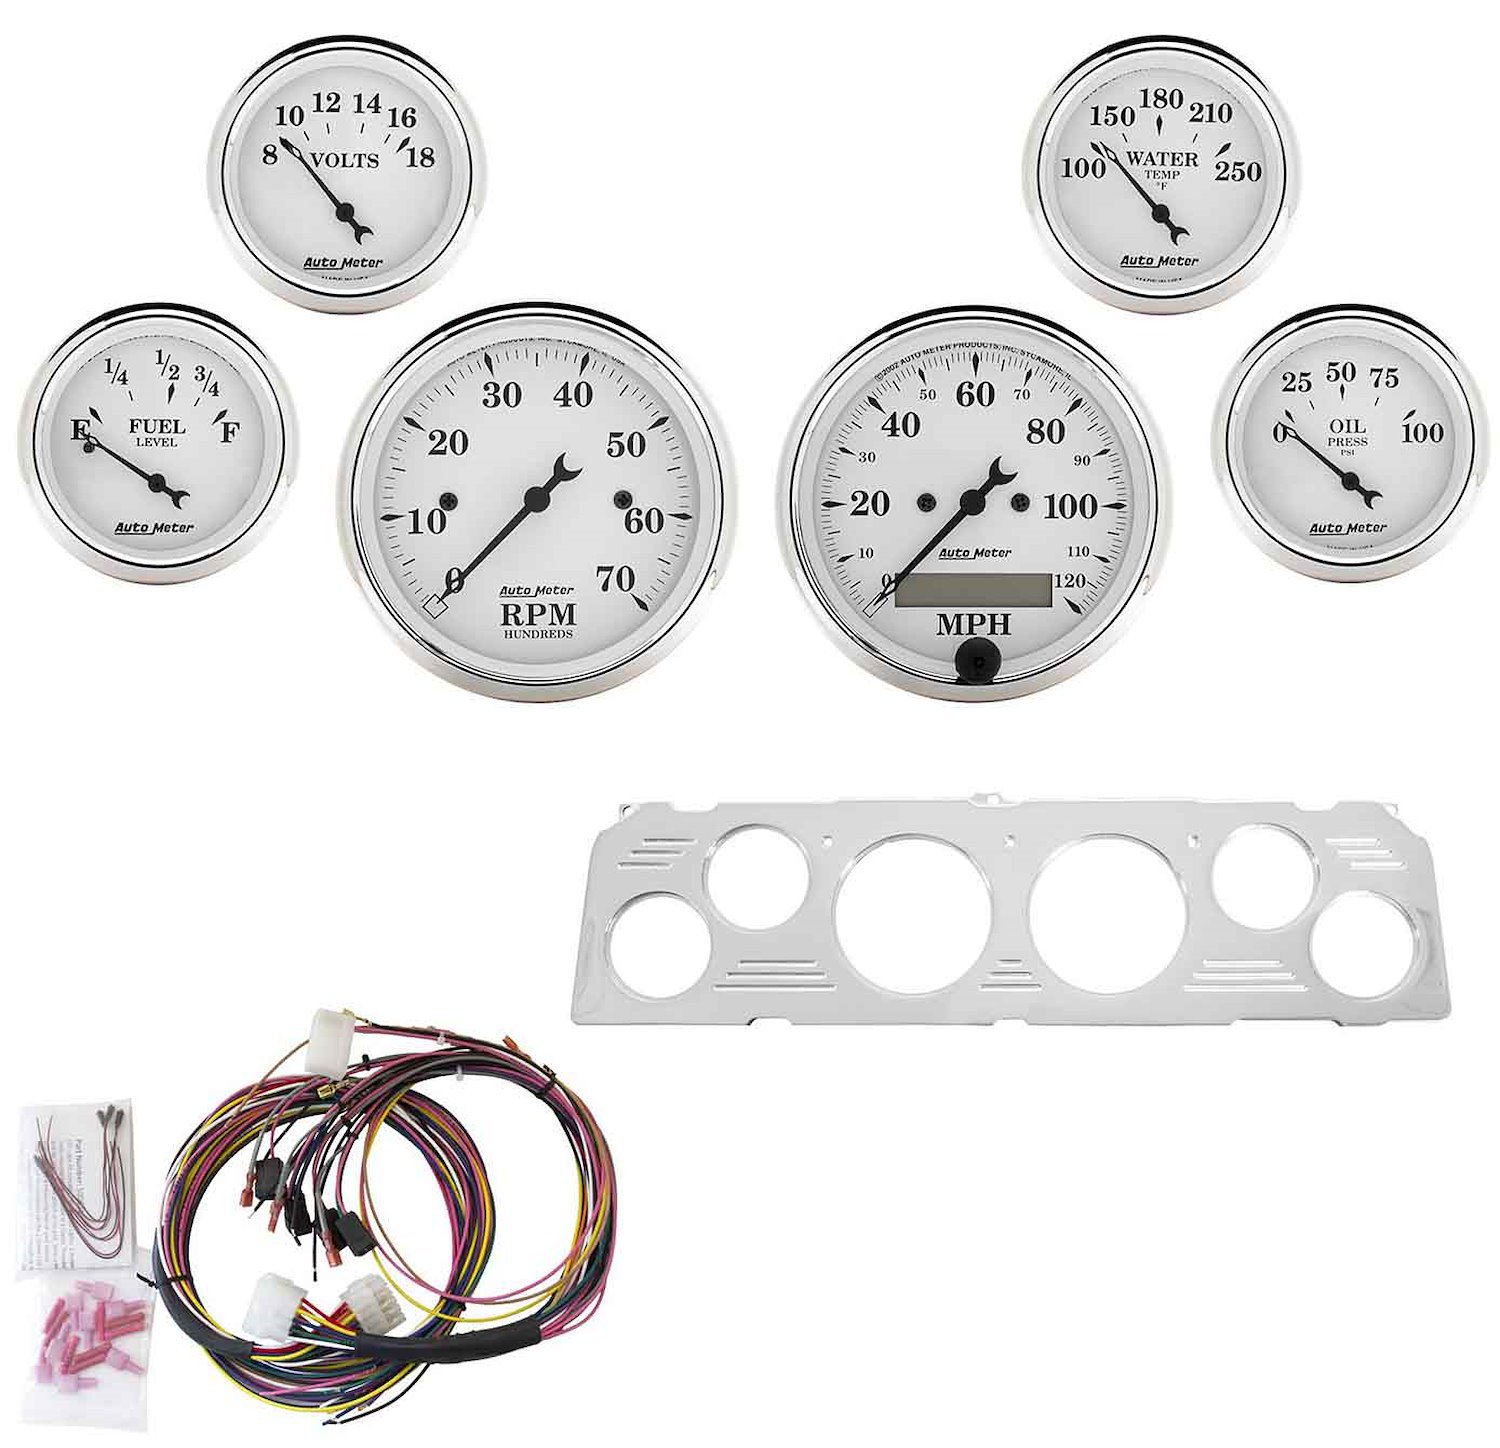 6-Gauge Direct-Fit Dash Kit 1964-1966 Chevy Truck - Old Tyme White Series - Polished Panel